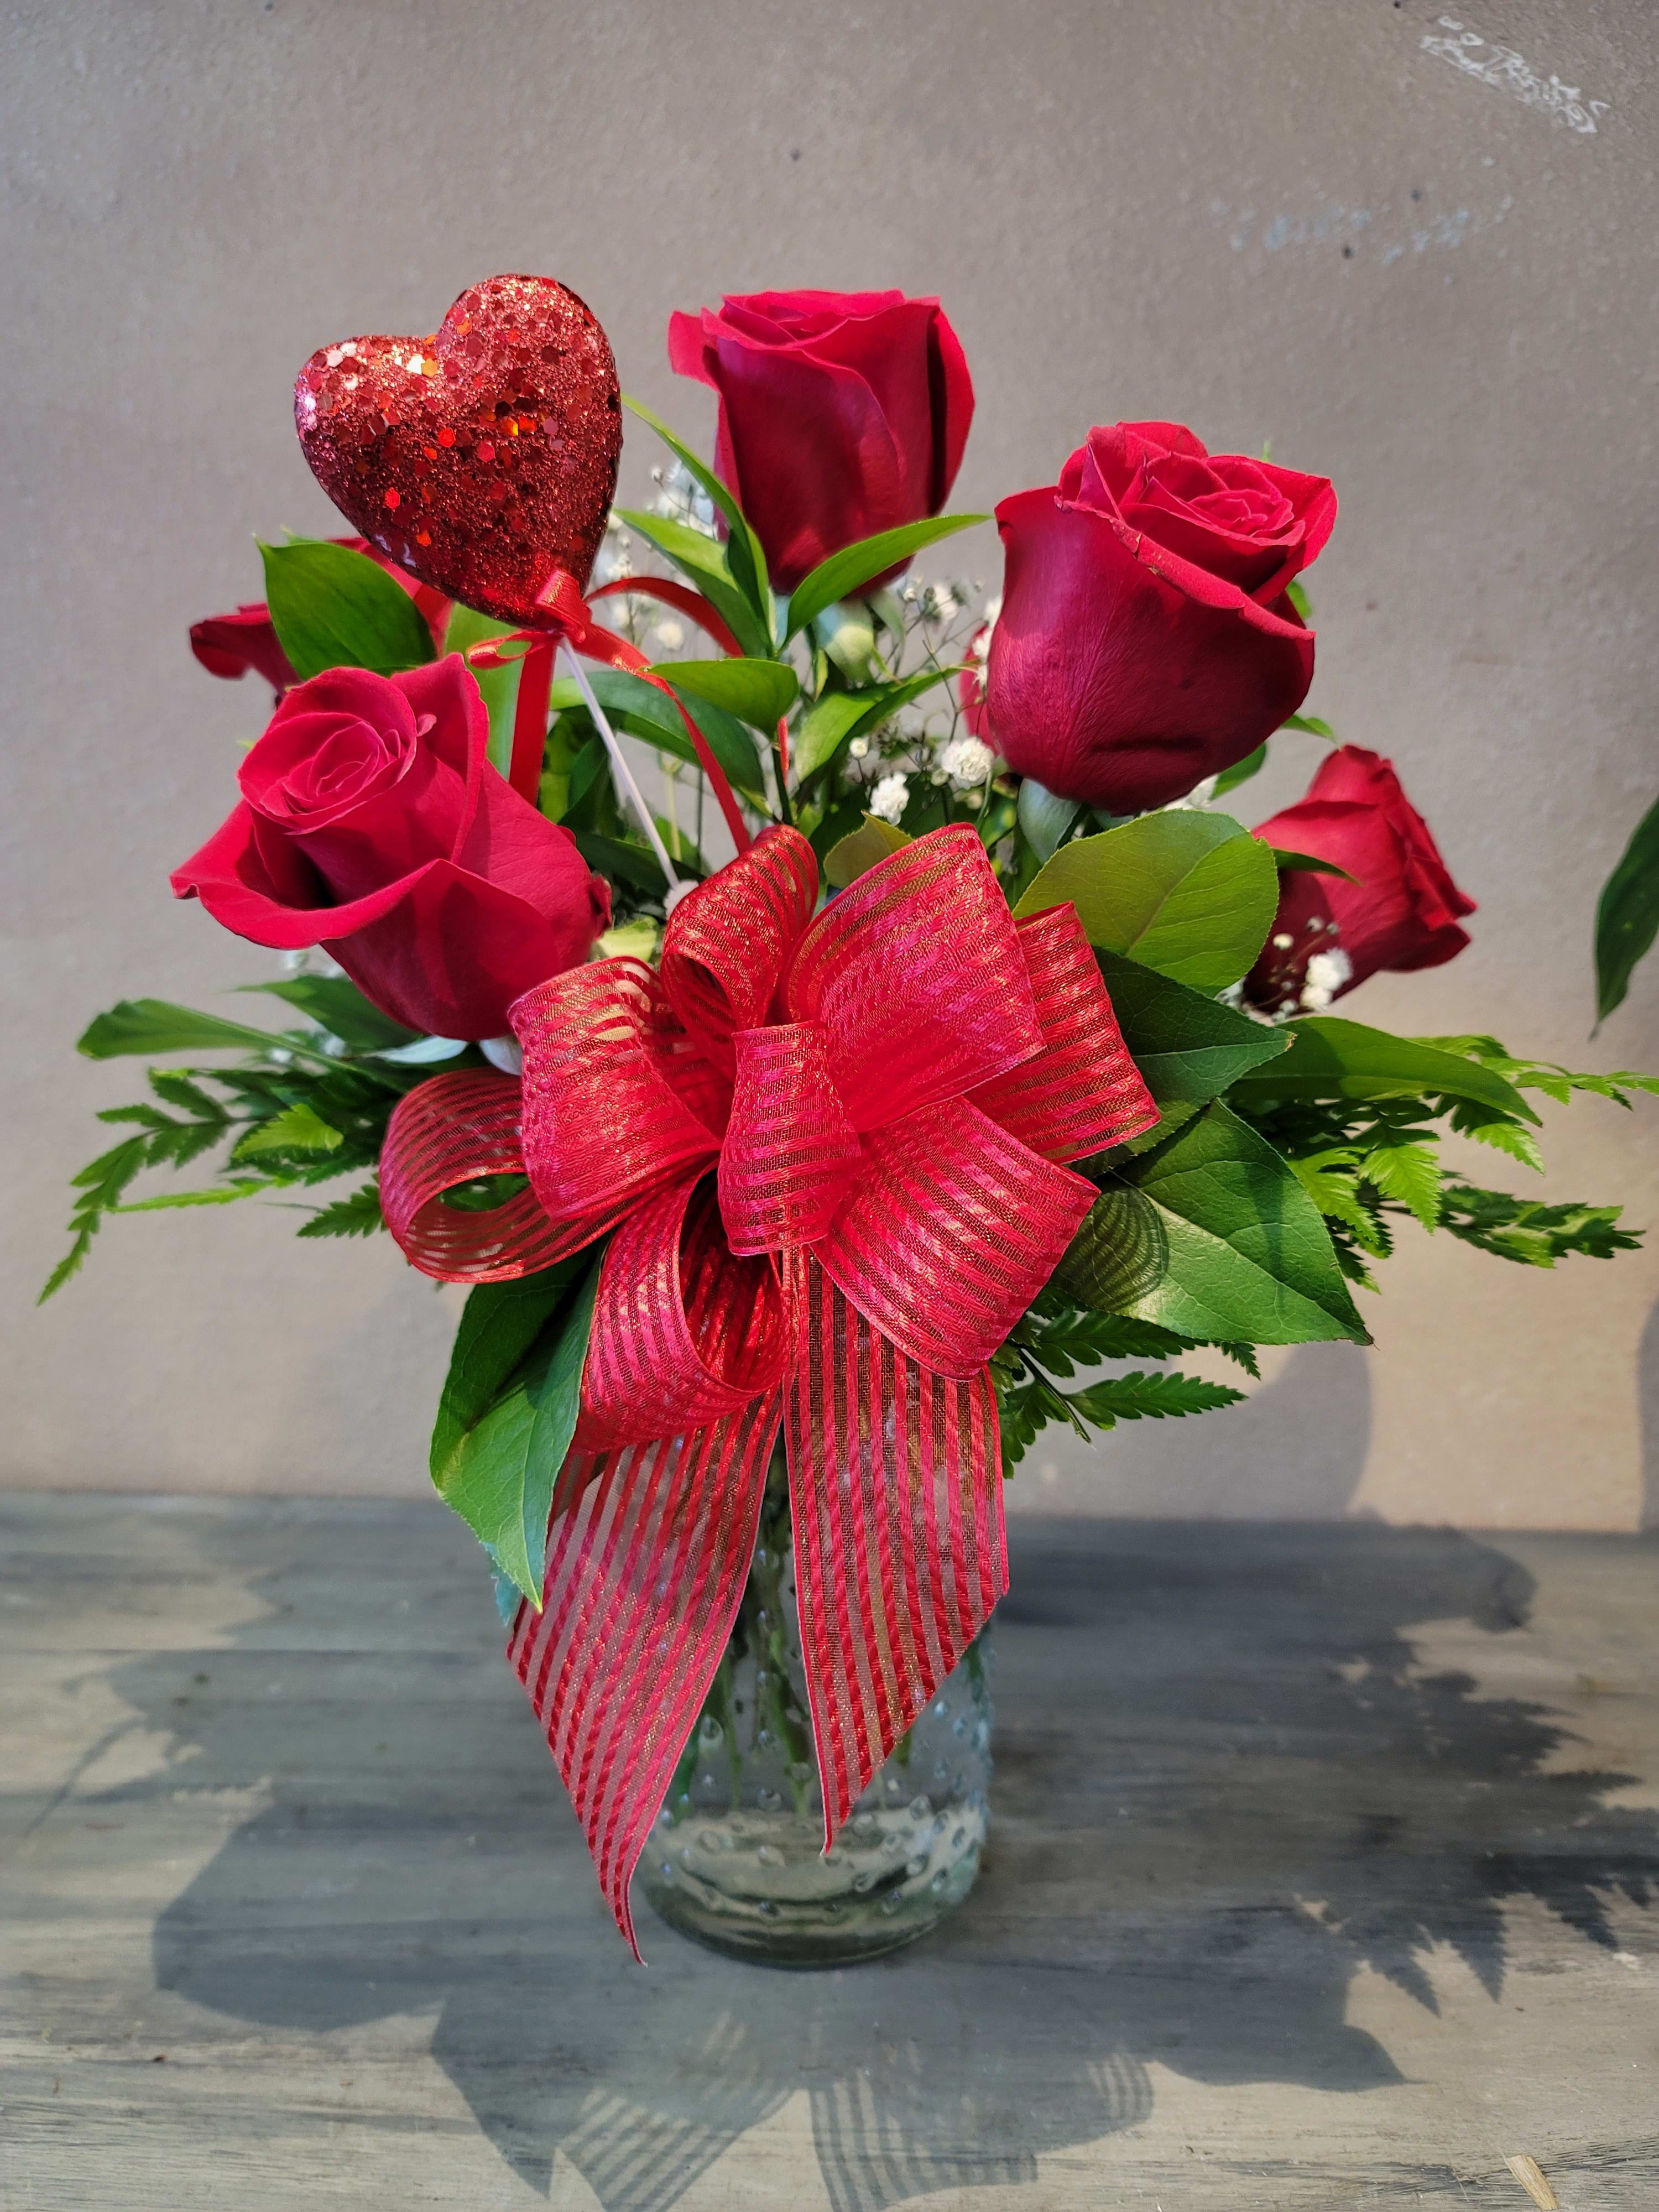 Half Dozen Red Roses - A cute arrangement of six red roses paired with nice greenery and filler flower.   Please Note: Exact vase may vary based on availability. Filler flower may vary. For any specific requests or if you want a different color rose, please call us ahead of placing your order.